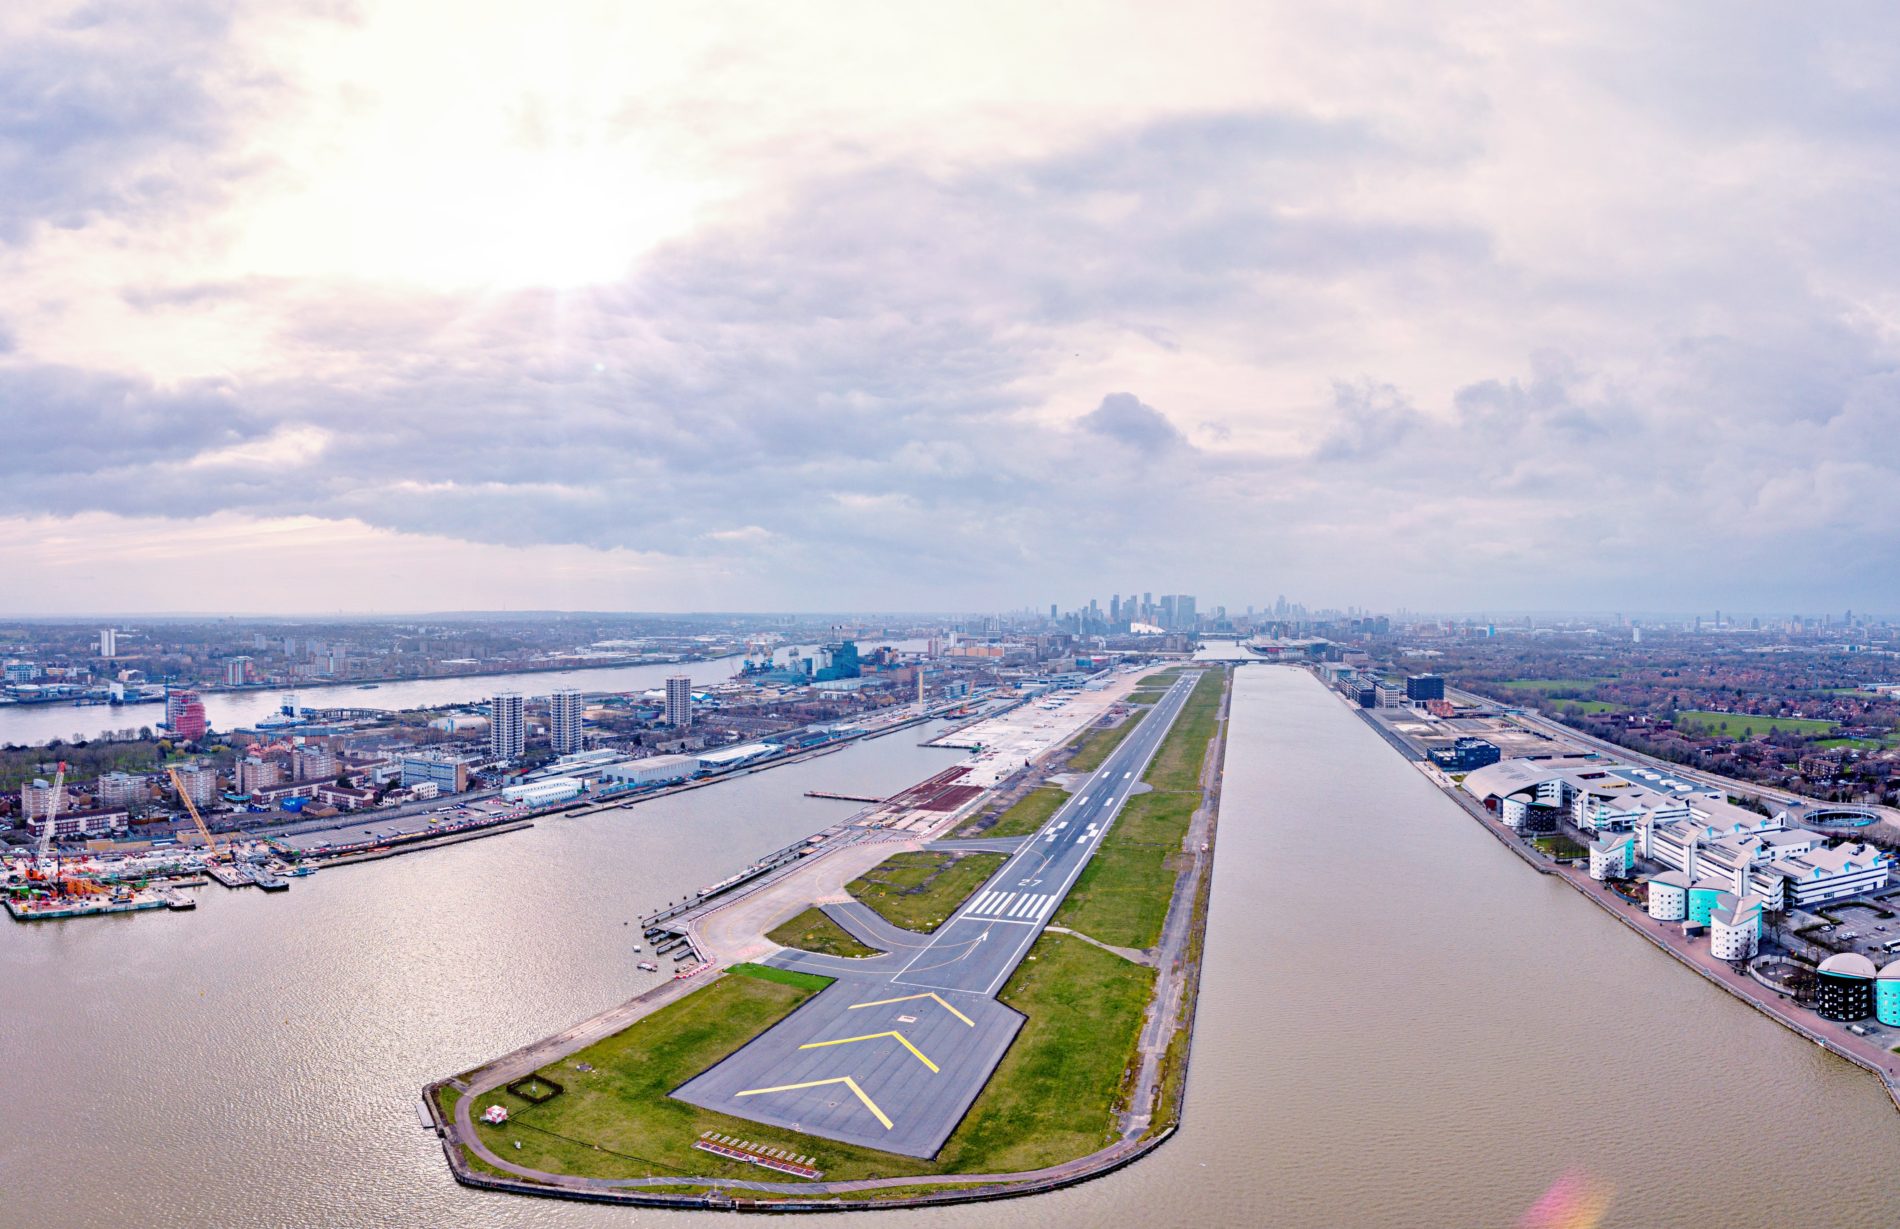 London City Airport aims to be capital’s first net zero airport by 2030 | News